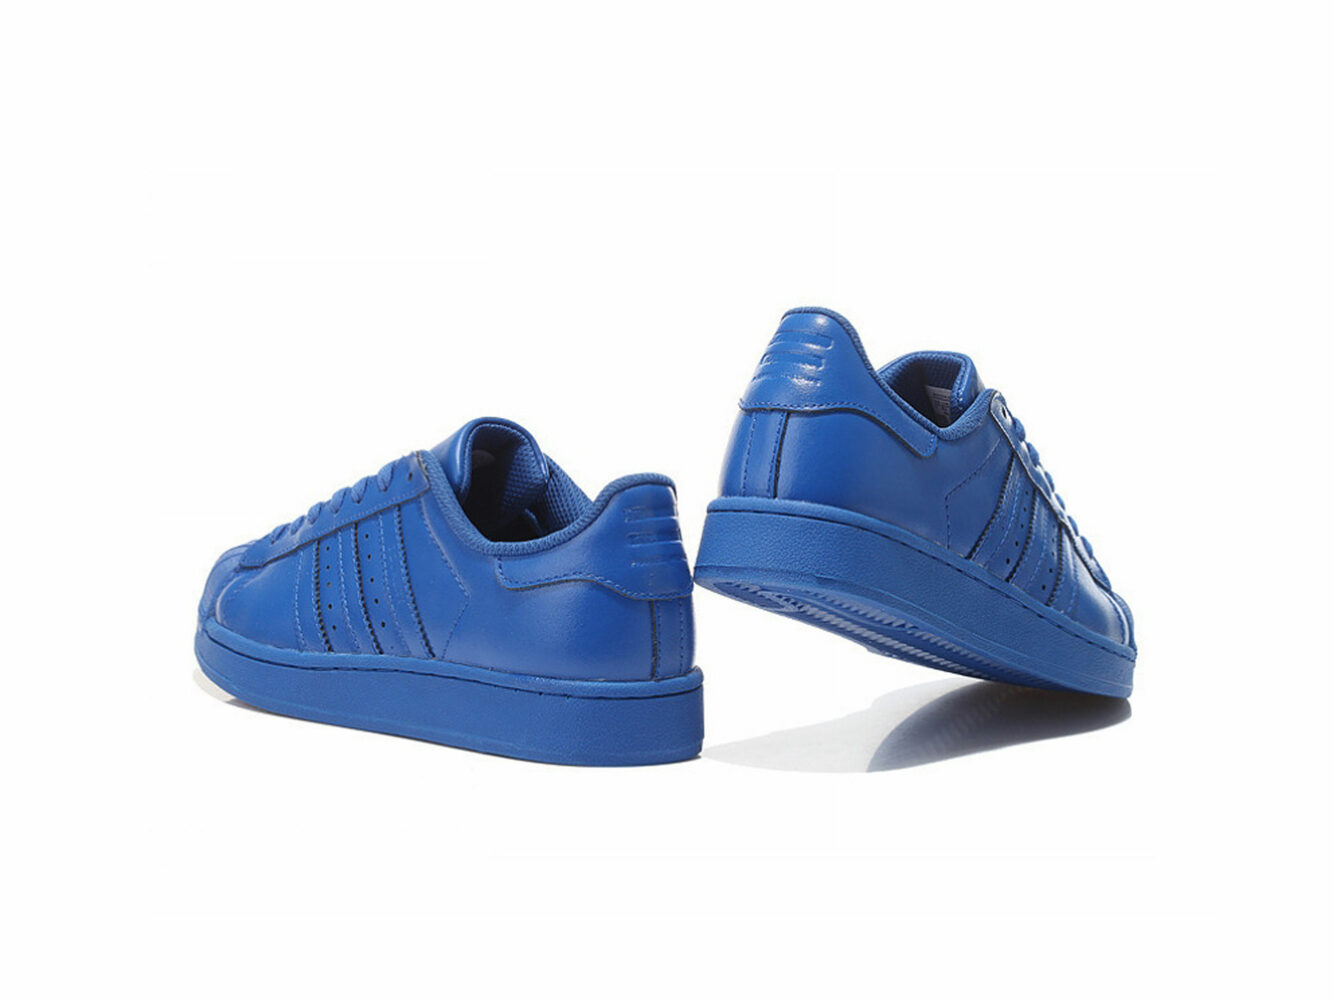 adidas superstar supercolor by Pharrell Williams bold blue